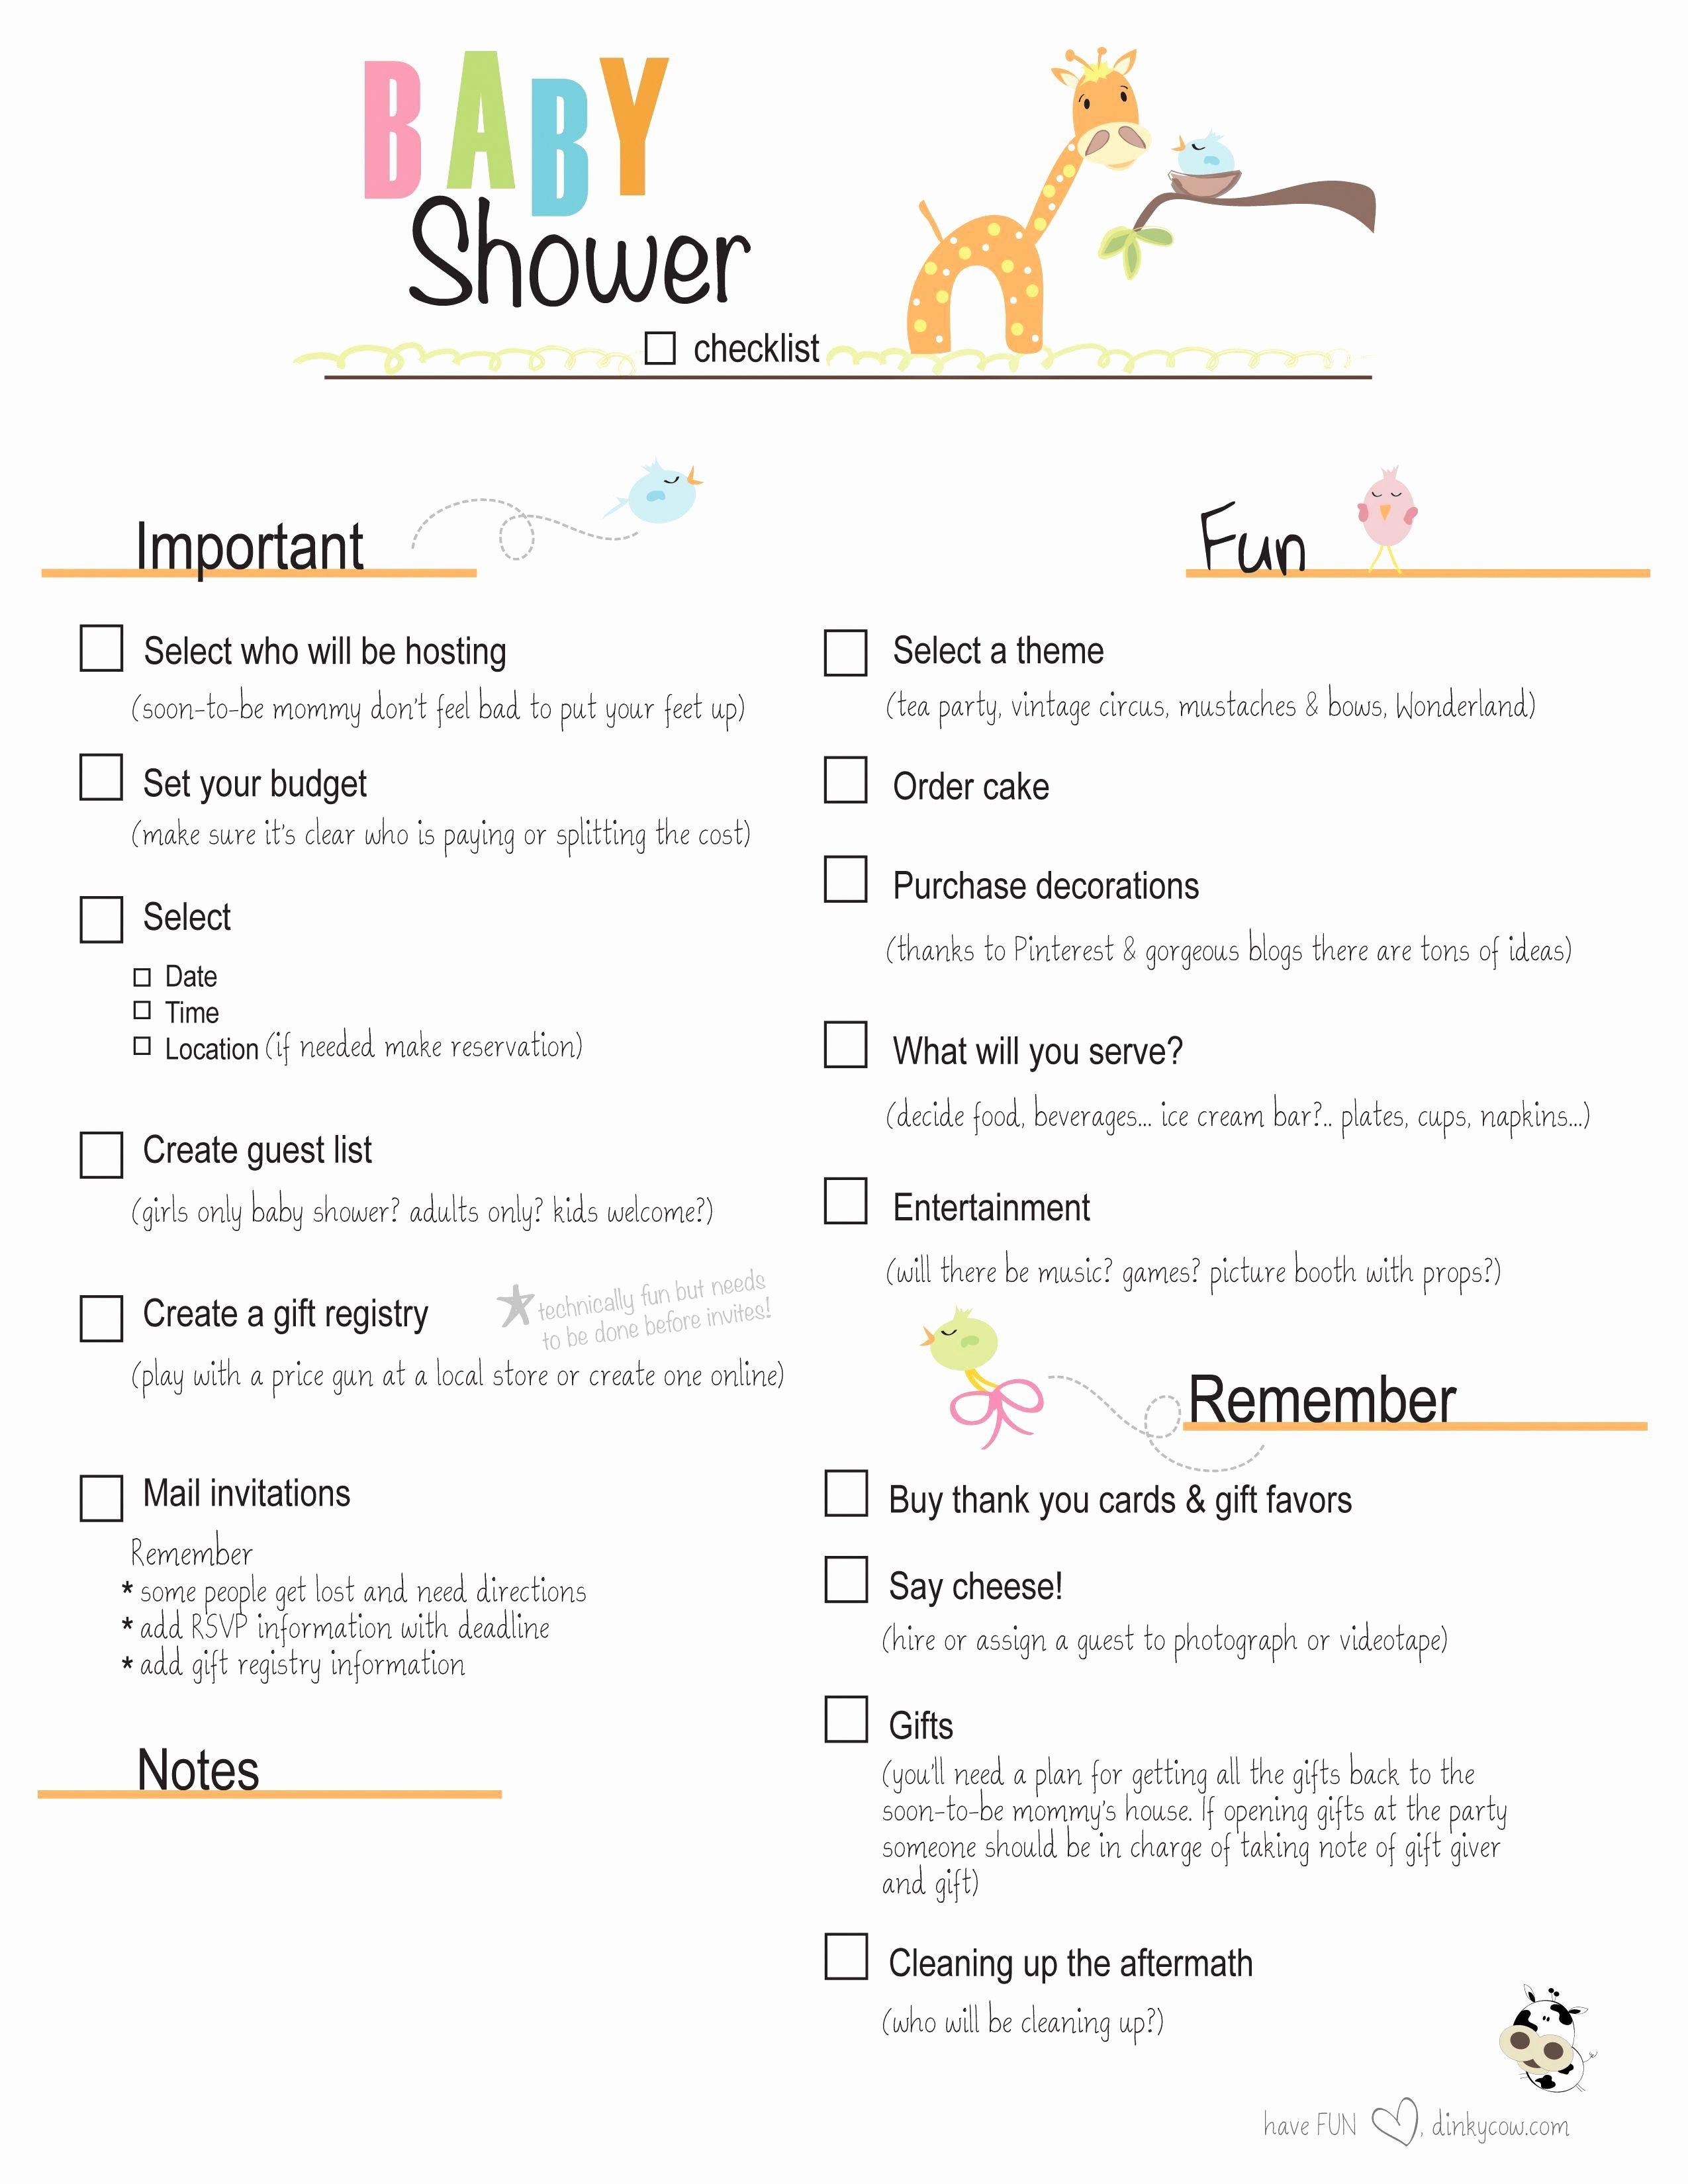 Baby Shower Planning Check List Inspirational Free Printable Baby Shower Checklist